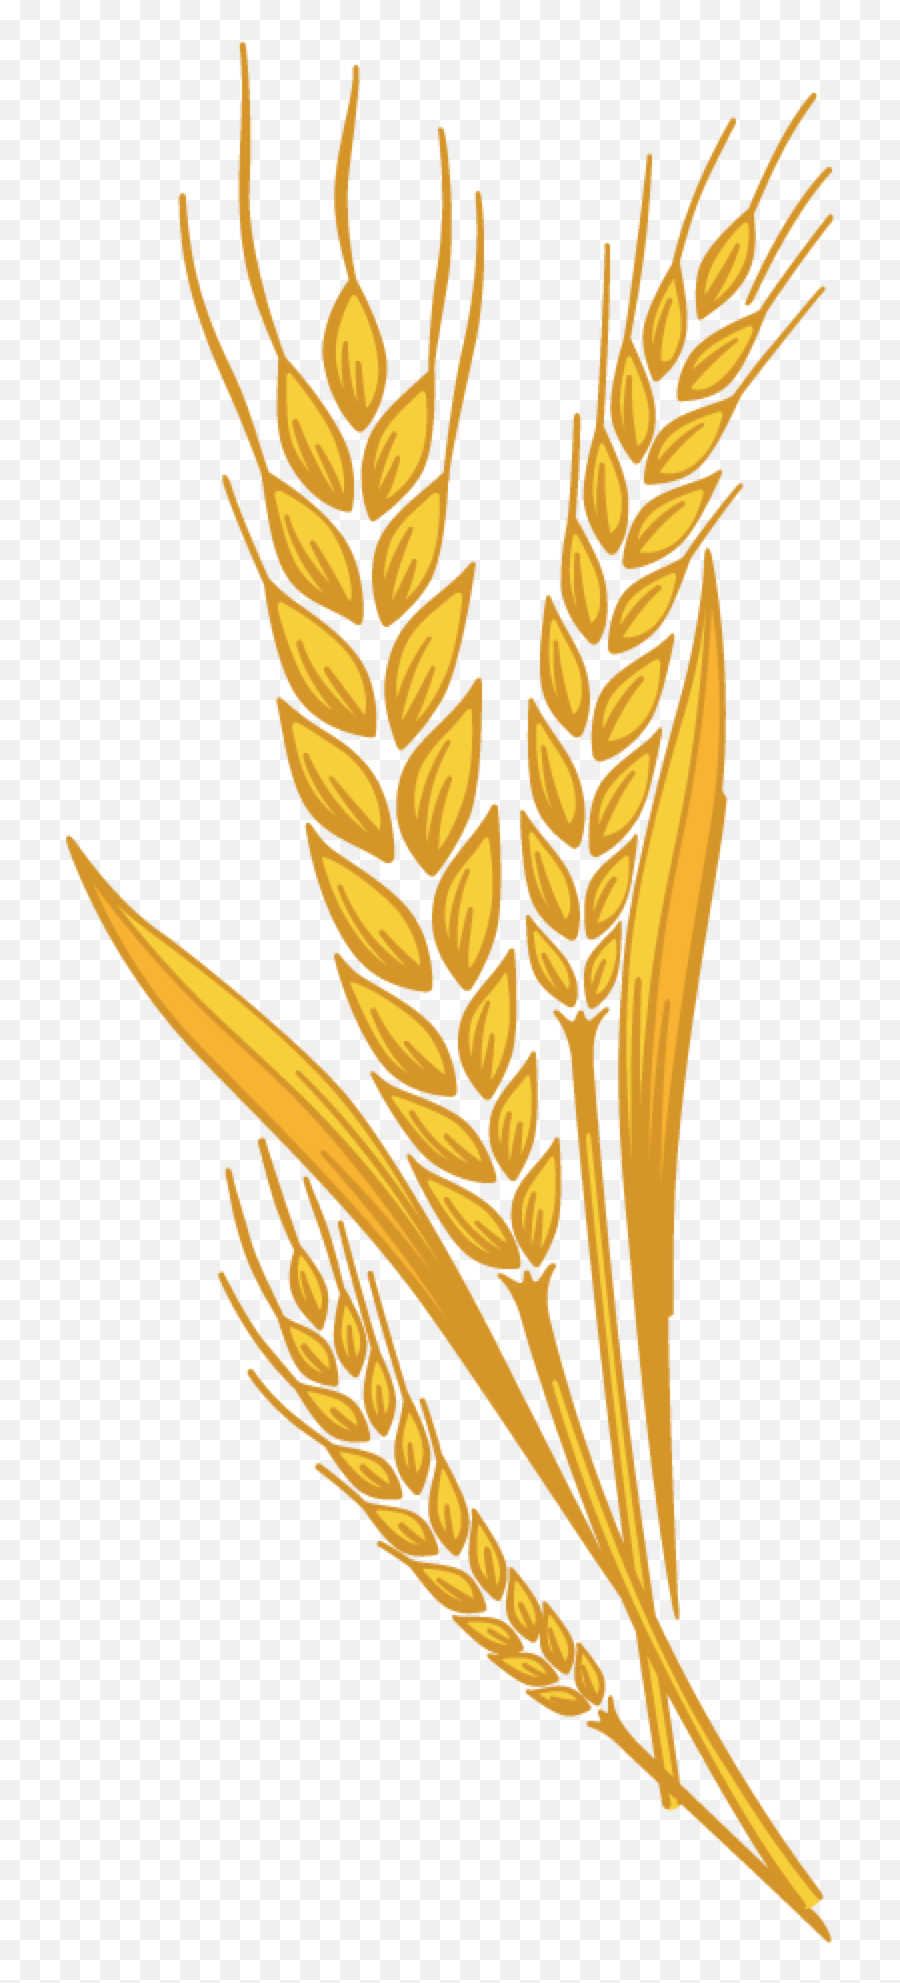 Library Of Shock Of Wheat Graphic Library With Transparent - Wheat Clipart Emoji,Wheat Emoji